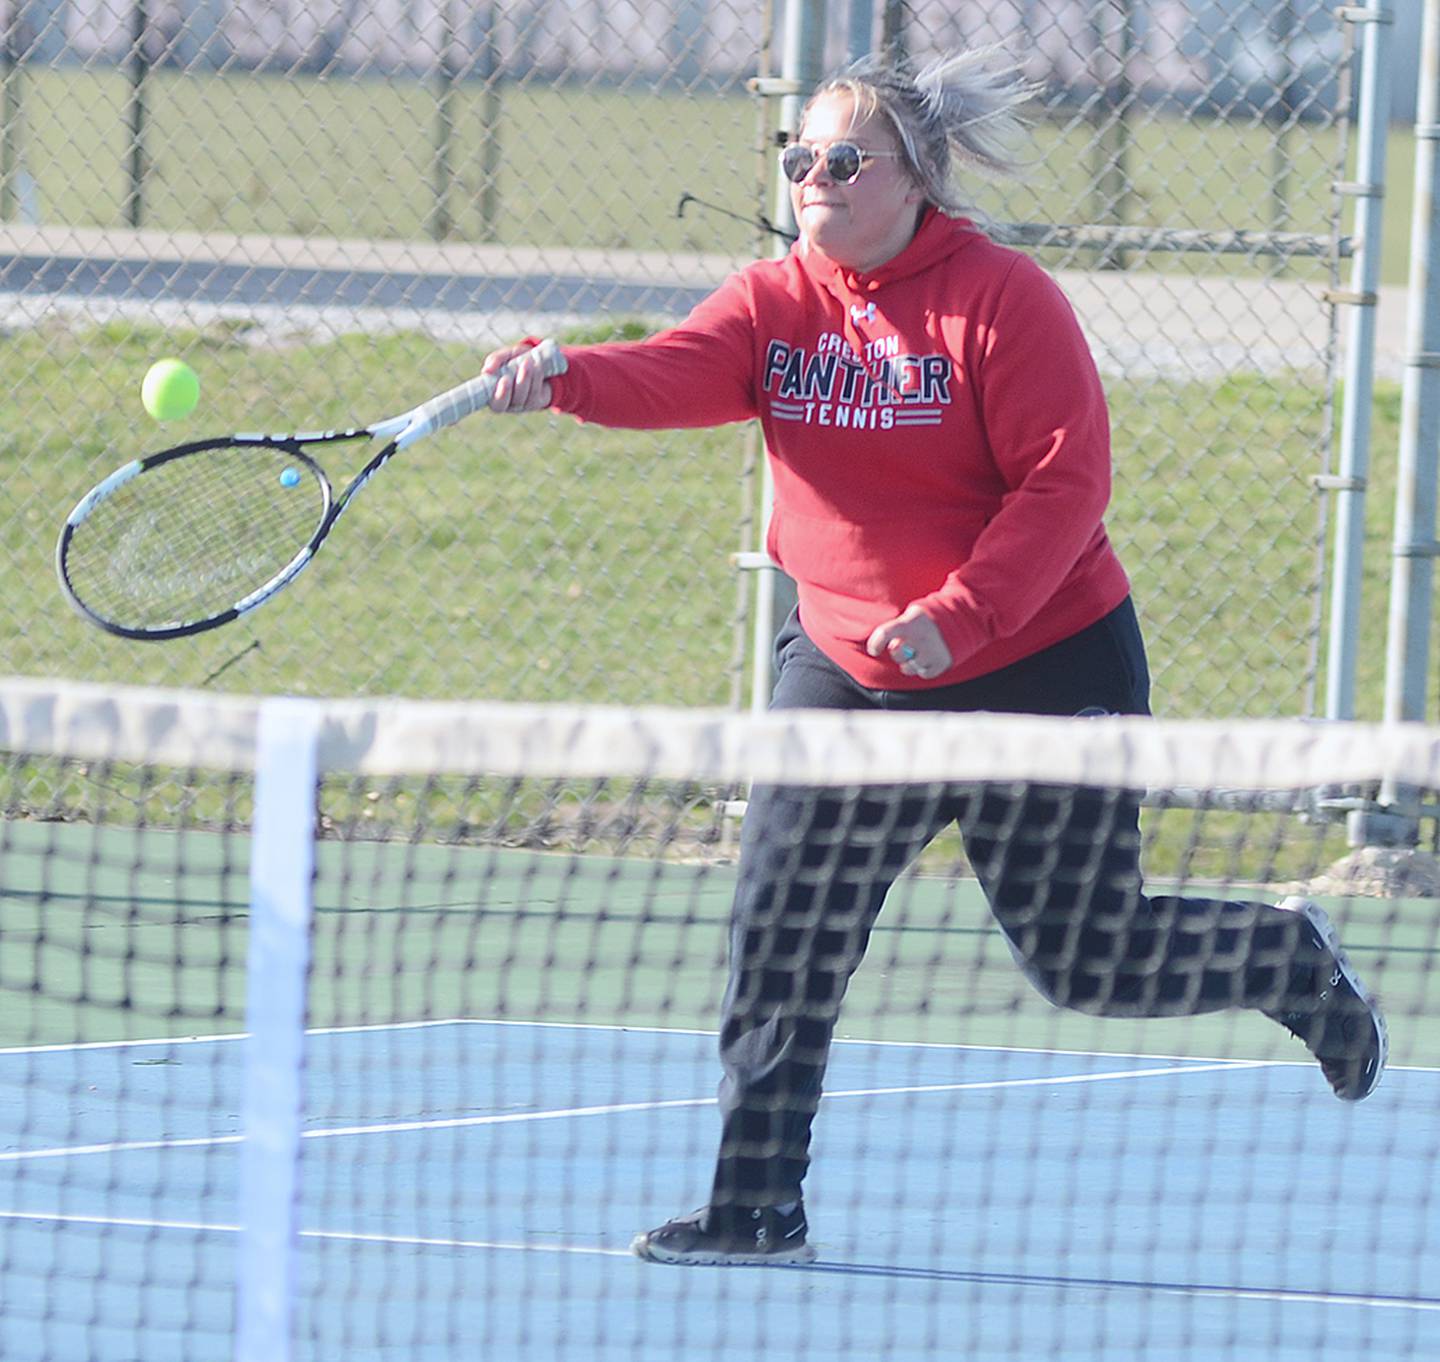 Creston's Abbie Wheeler reaches to return a shot near the net during her 9-7 singles win against Red Oak Thursday. Wheeler also teamed with Kolbey Bailey to win 9-8 on a tiebreaker at No. 3 doubles.